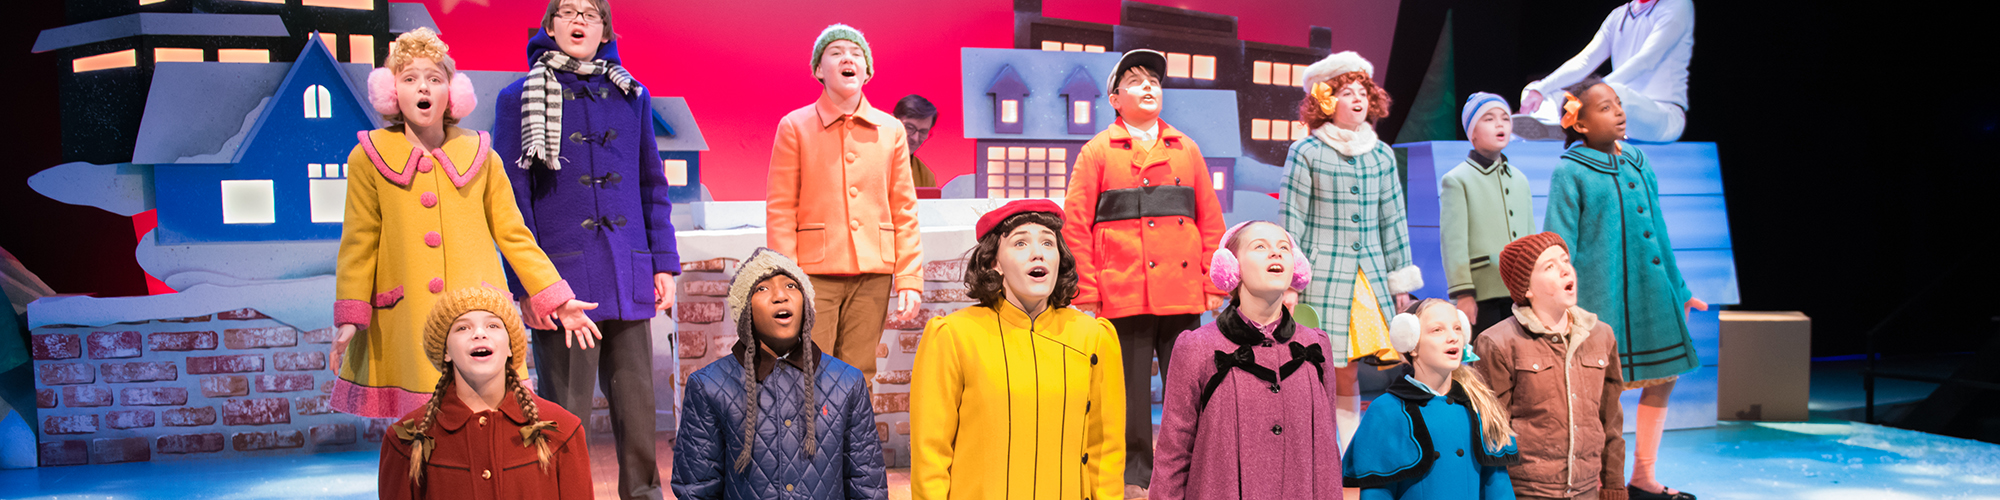 Image from First Stage's production of A CHARLIE BROWN CHRISTMAS